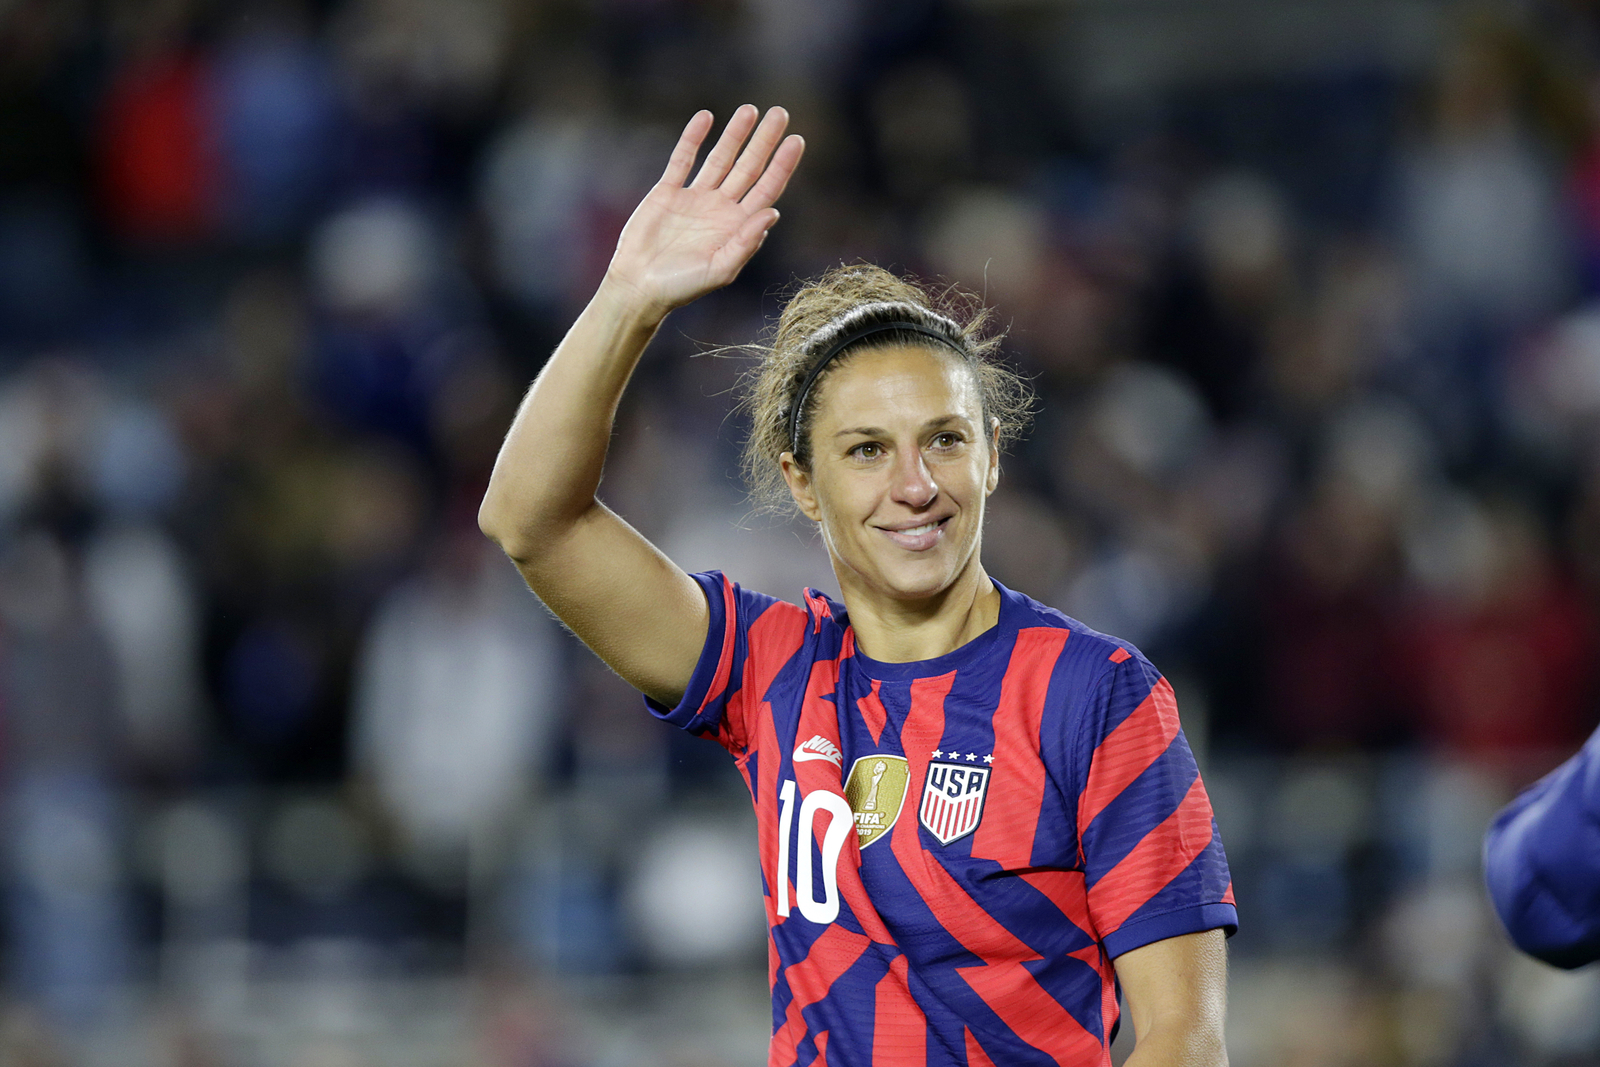 Retired U.S. soccer star and Delran, New Jersey native Carli Lloyd announces she and her husband are expecting baby in October [Video]